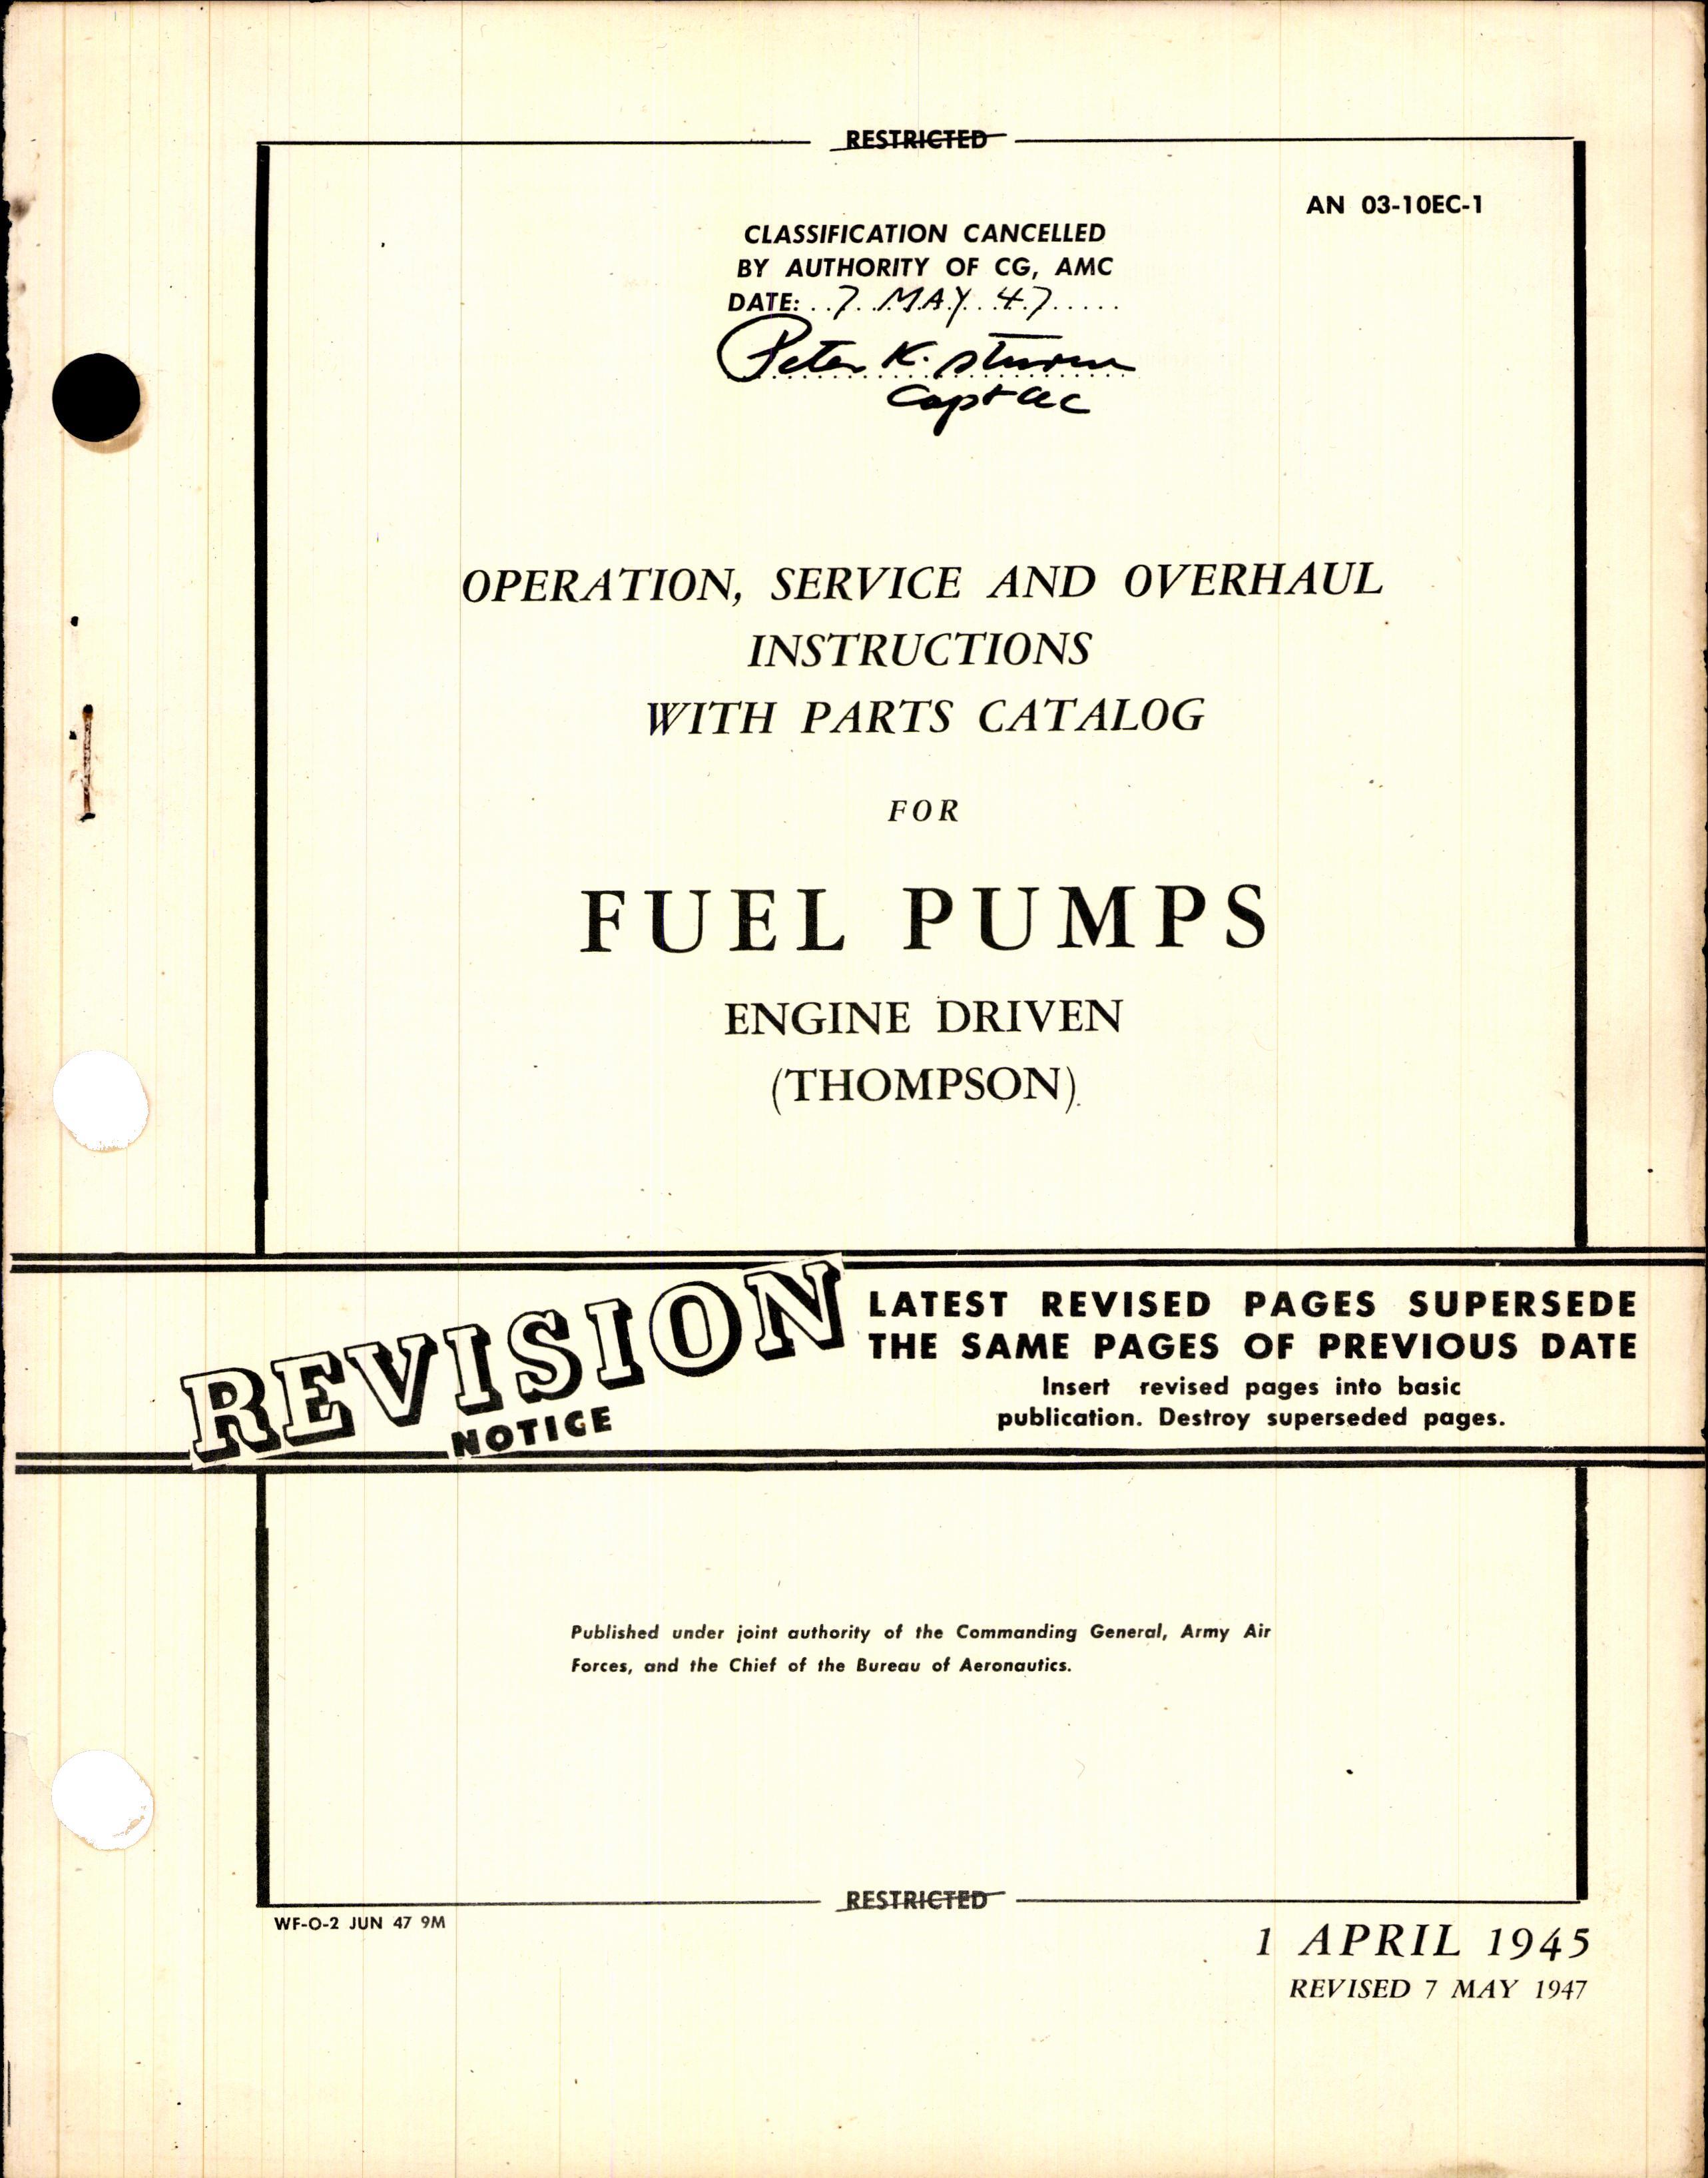 Sample page 5 from AirCorps Library document: Operation, Service, & Overhaul Instructions with Parts Catalog for Thompson Engine-Driven Fuel Pumps